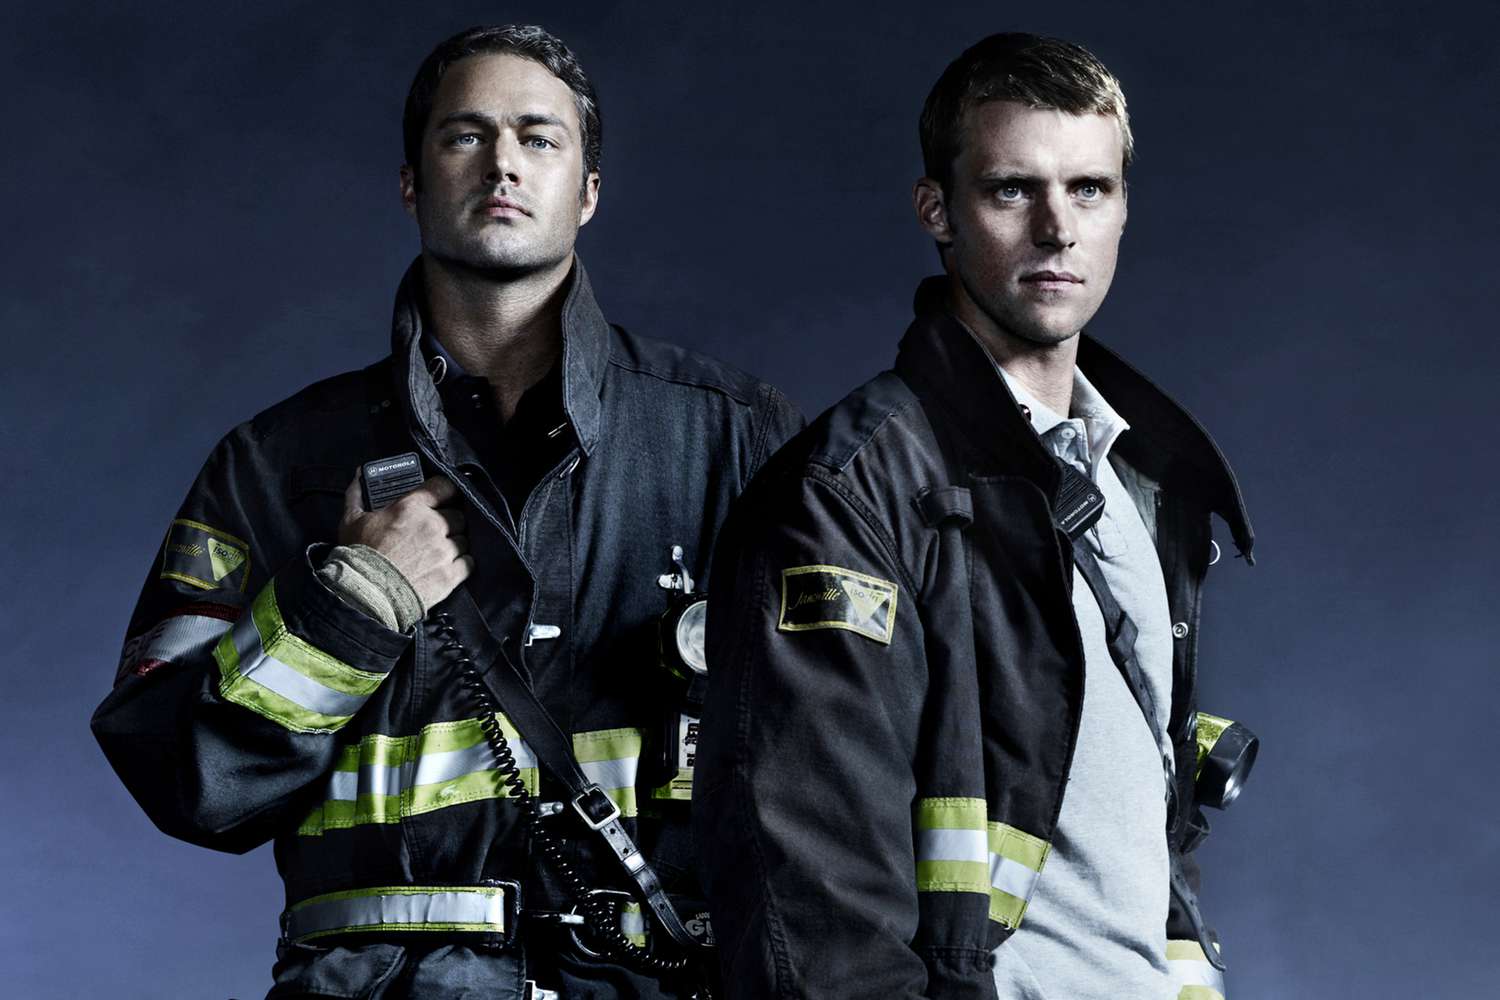 CHICAGO FIRE -- Season: 2 -- Pictured: (l-r) Taylor Kinney as Kelly Severide, Jesse Spencer as Matthew Casey -- (Photo by: Nino Munoz/NBCU Photo Bank/NBCUniversal via Getty Images via Getty Images)